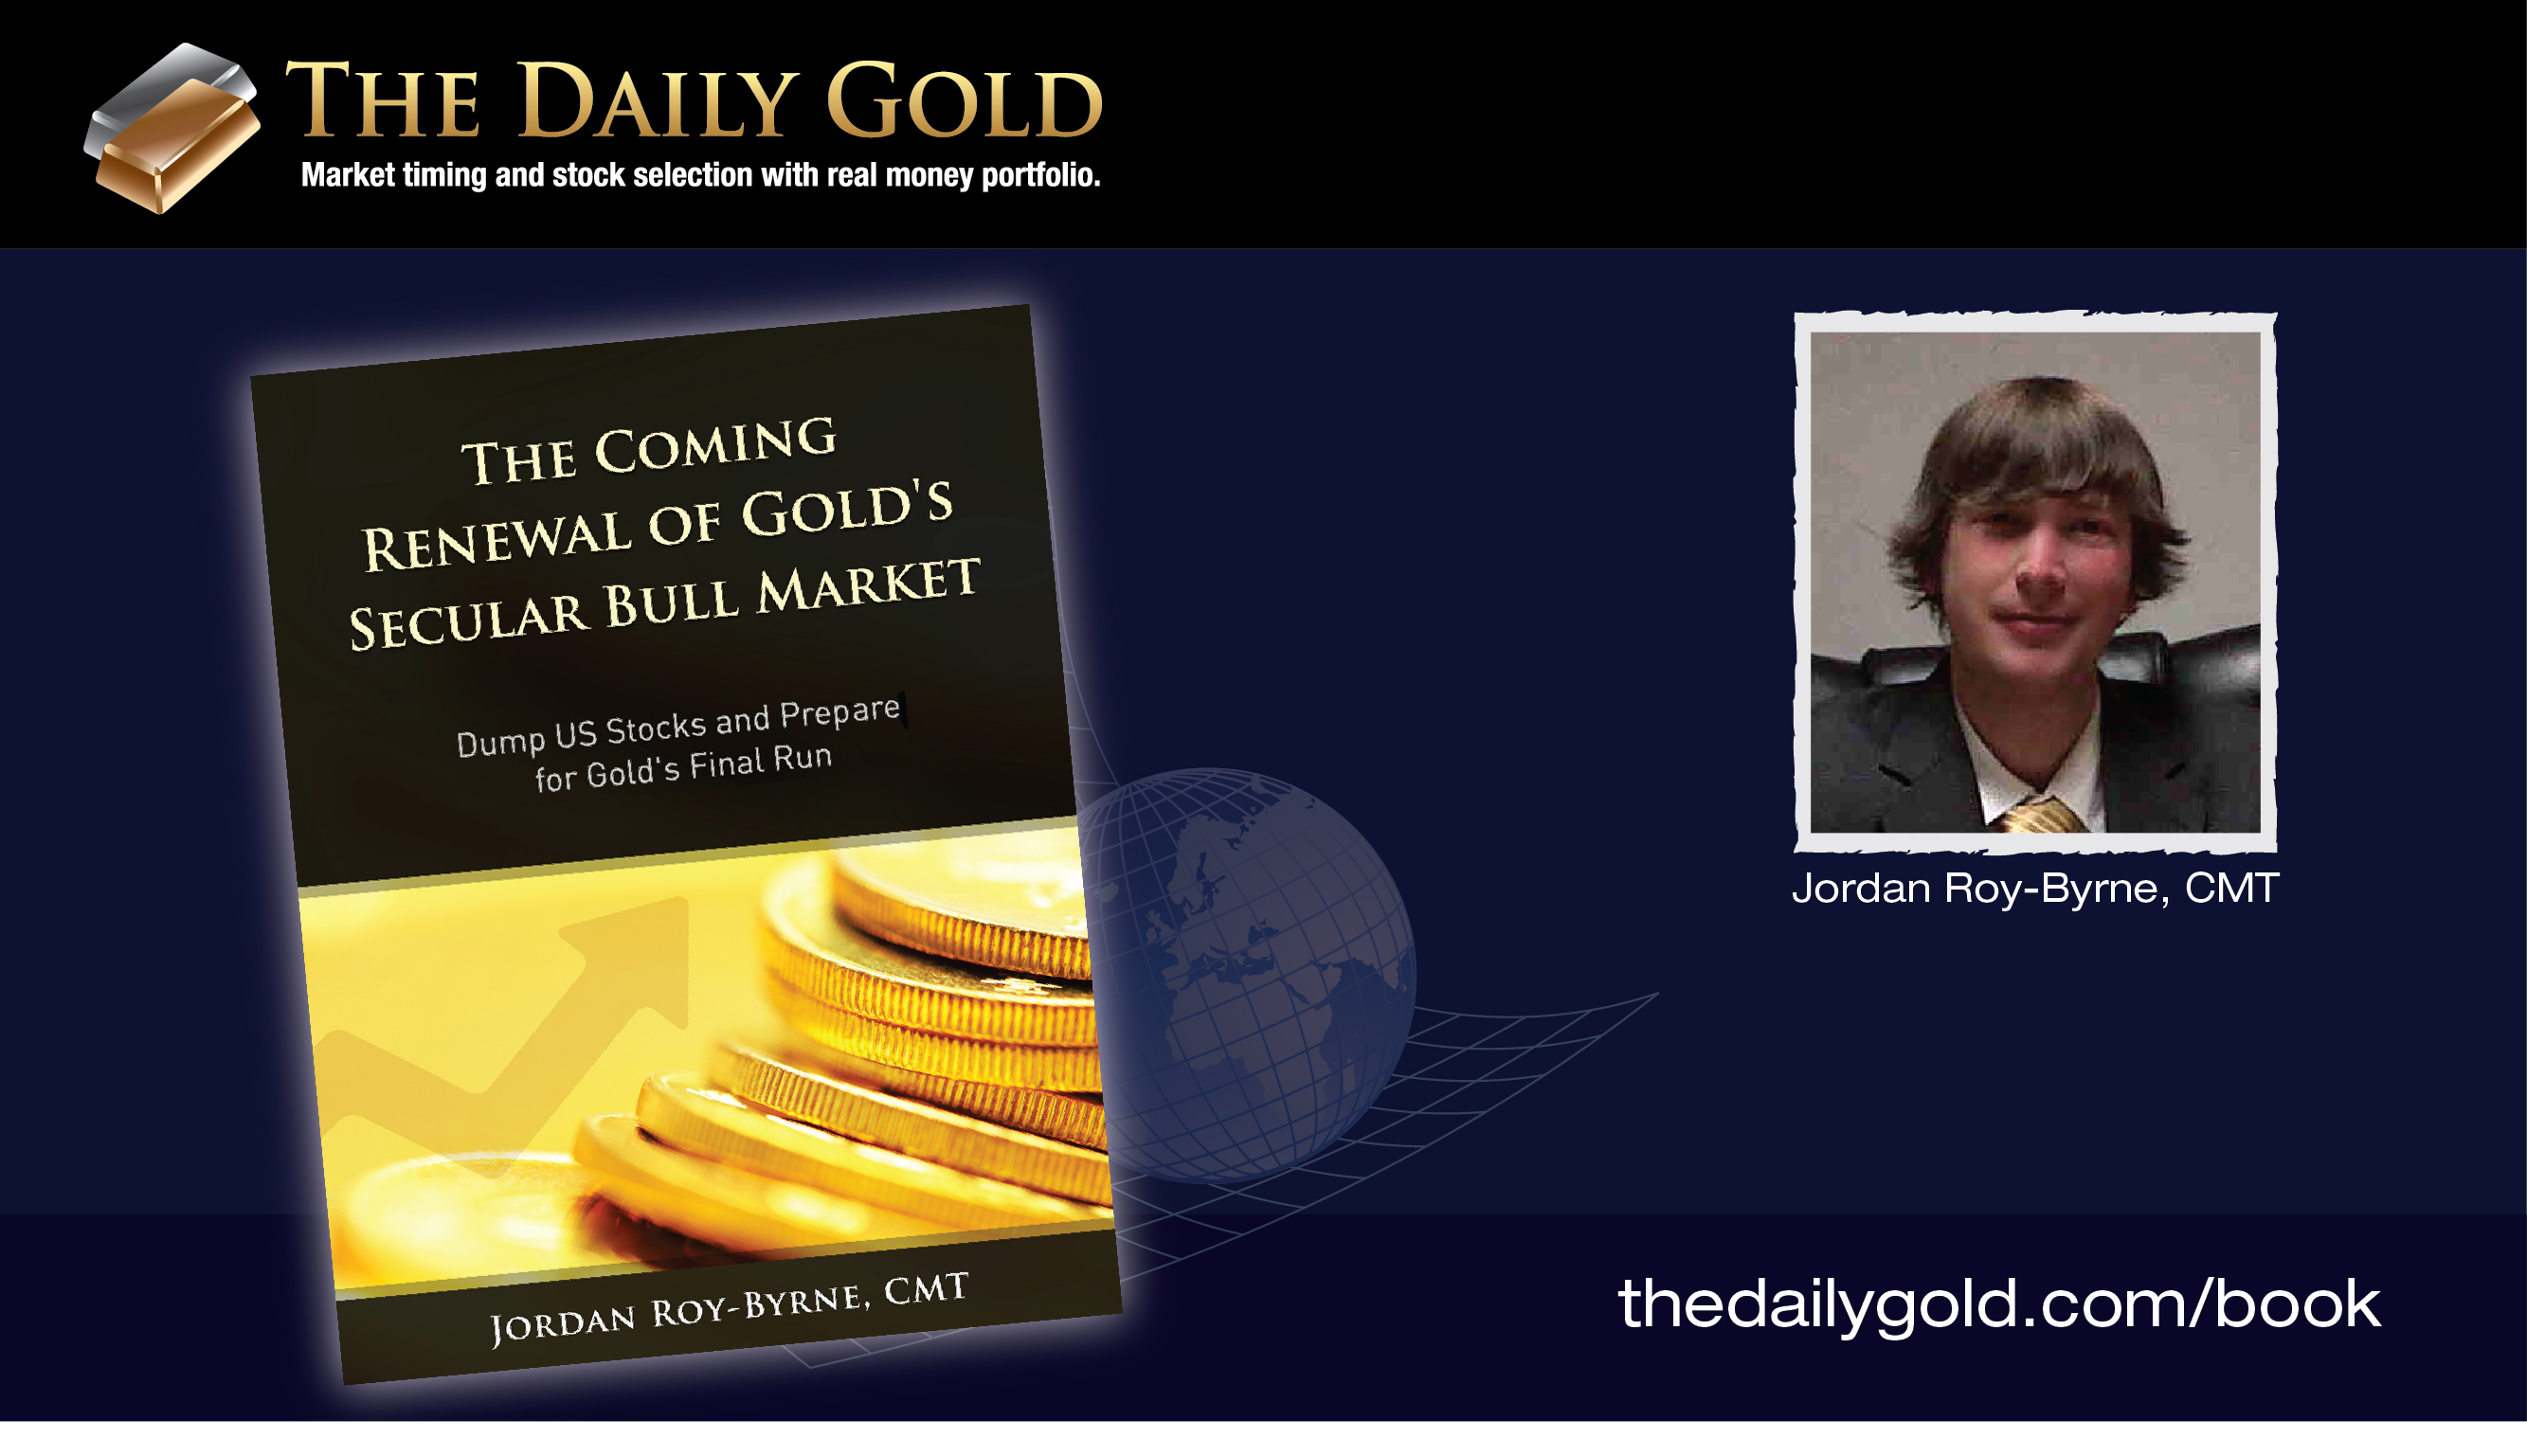 Video Commentary: Why is Gold Suddenly Performing Well?